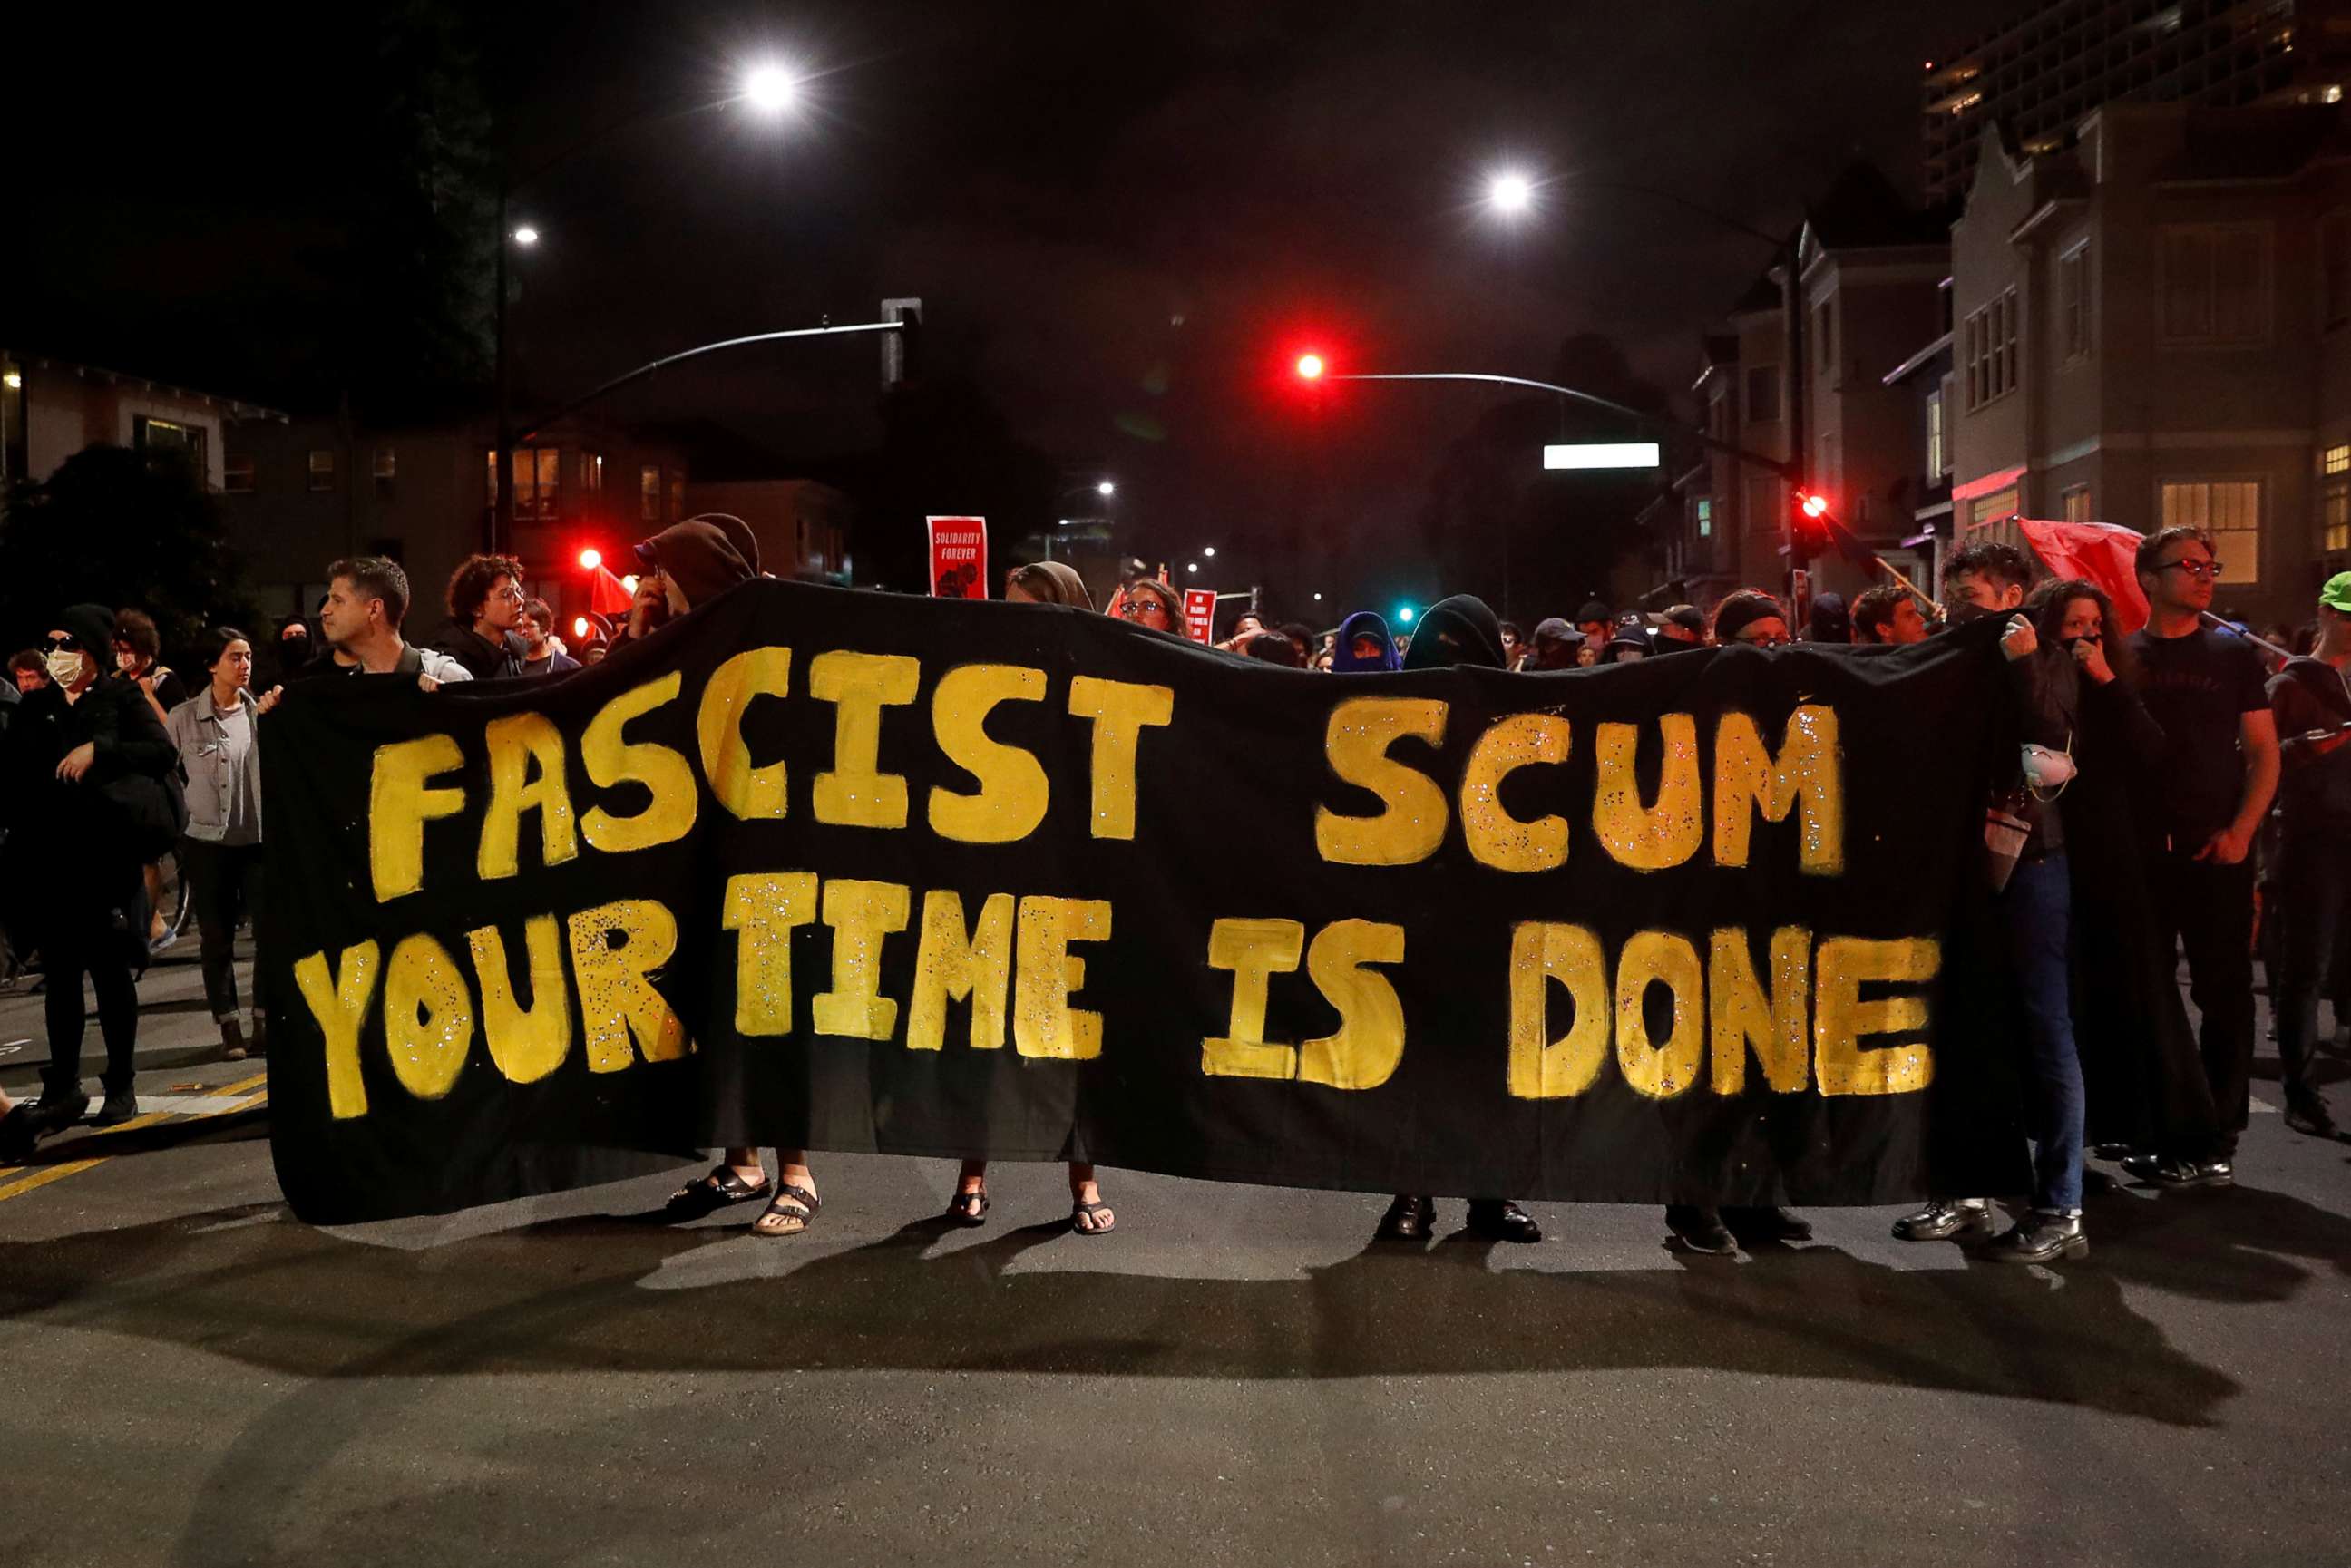 PHOTO: Demonstrators march in response in response to the Charlottesville, Virginia car attack on counter-protesters after the Unite the Right rally organized by white nationalists, in Oakland, Calif., Aug. 12, 2017. 